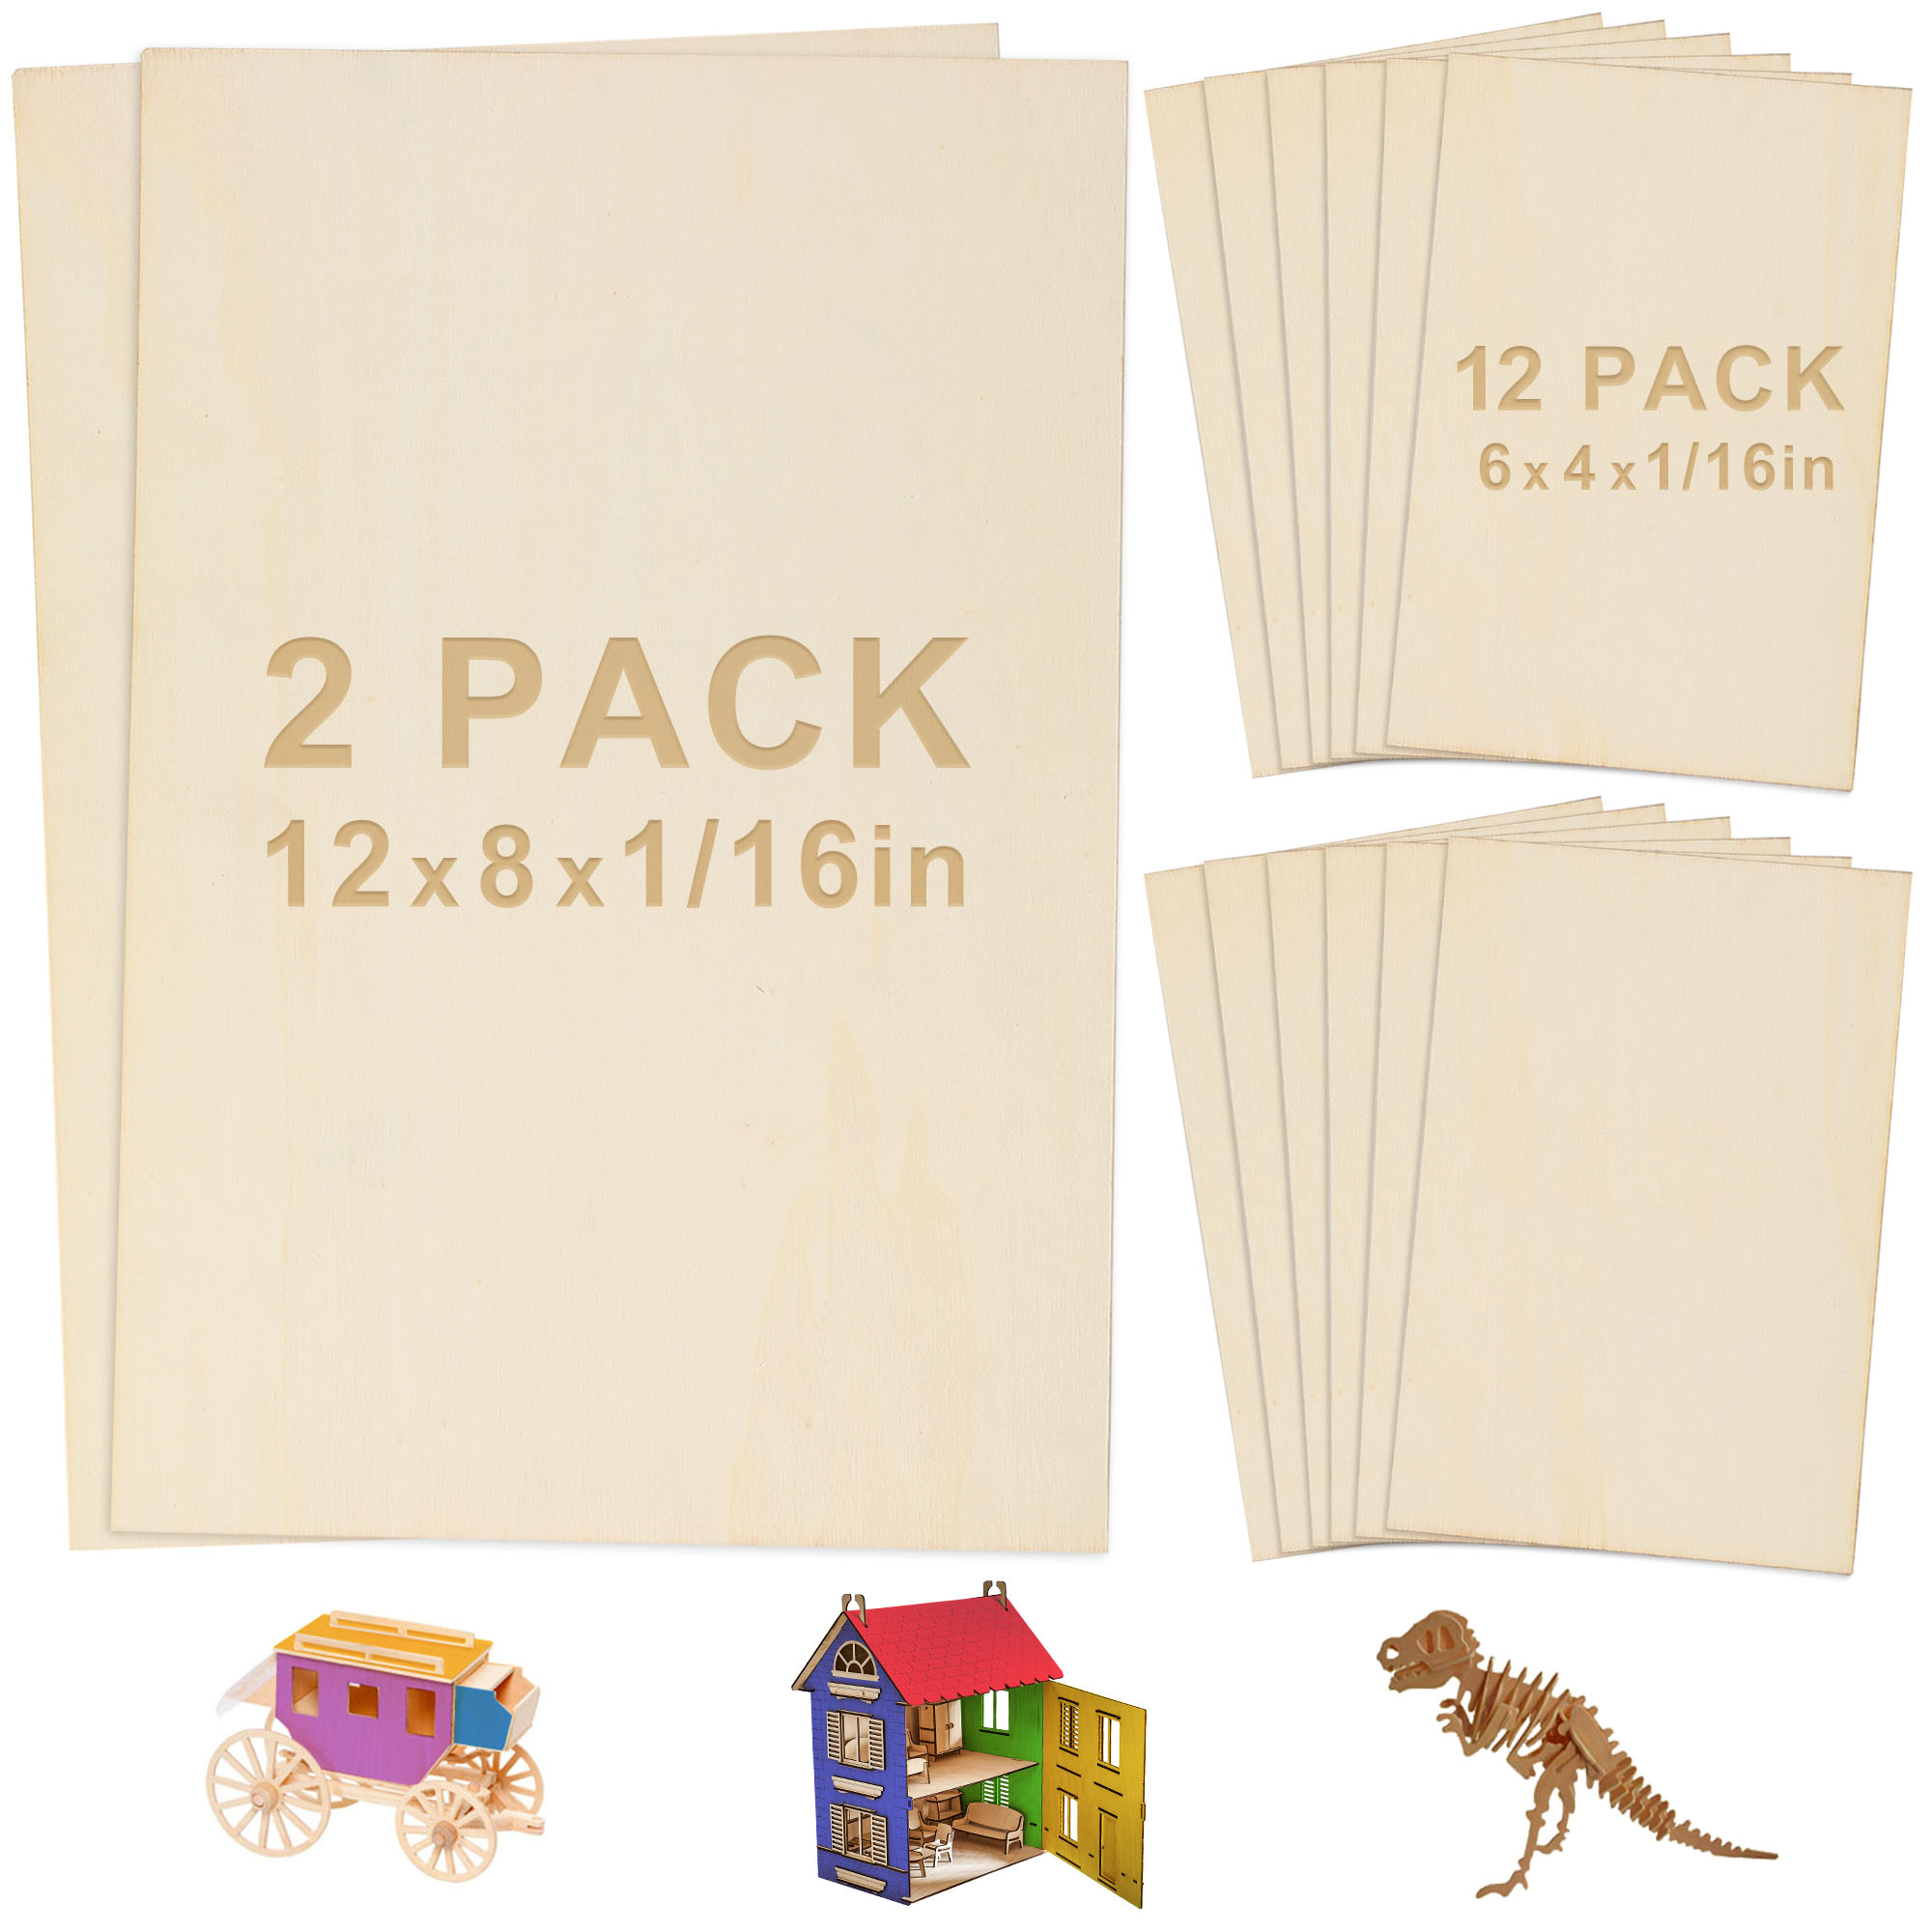 

Lotfancy Plywood Sheets For Crafts, 14pc Blank Unfinished Basswood Sheets, Thin Rectangle Wood Board Pieces, 2 Sizes - 12pc 150x100mm (6x4x1/16 In), 2pc 300x200mm (12x8x1/16 In)